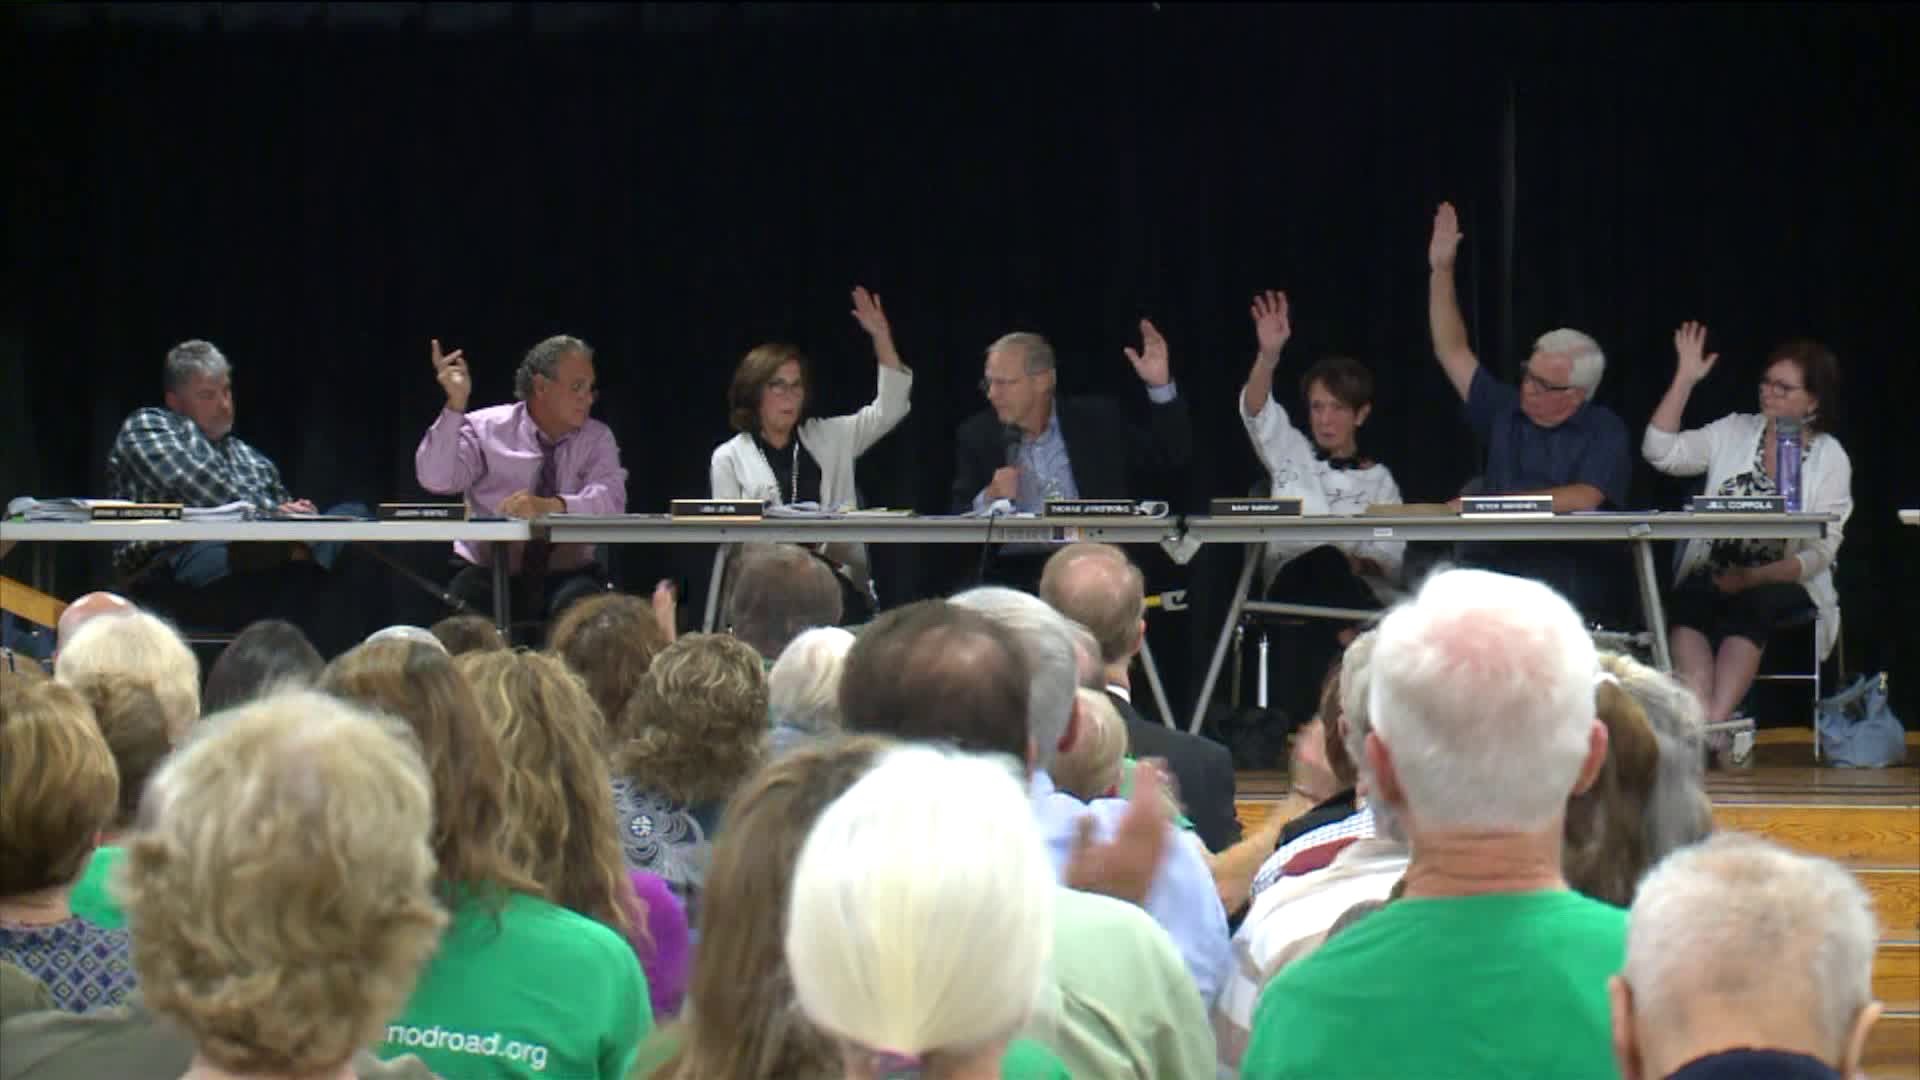 Avon residents erupt in cheers after town votes down Nod Road project